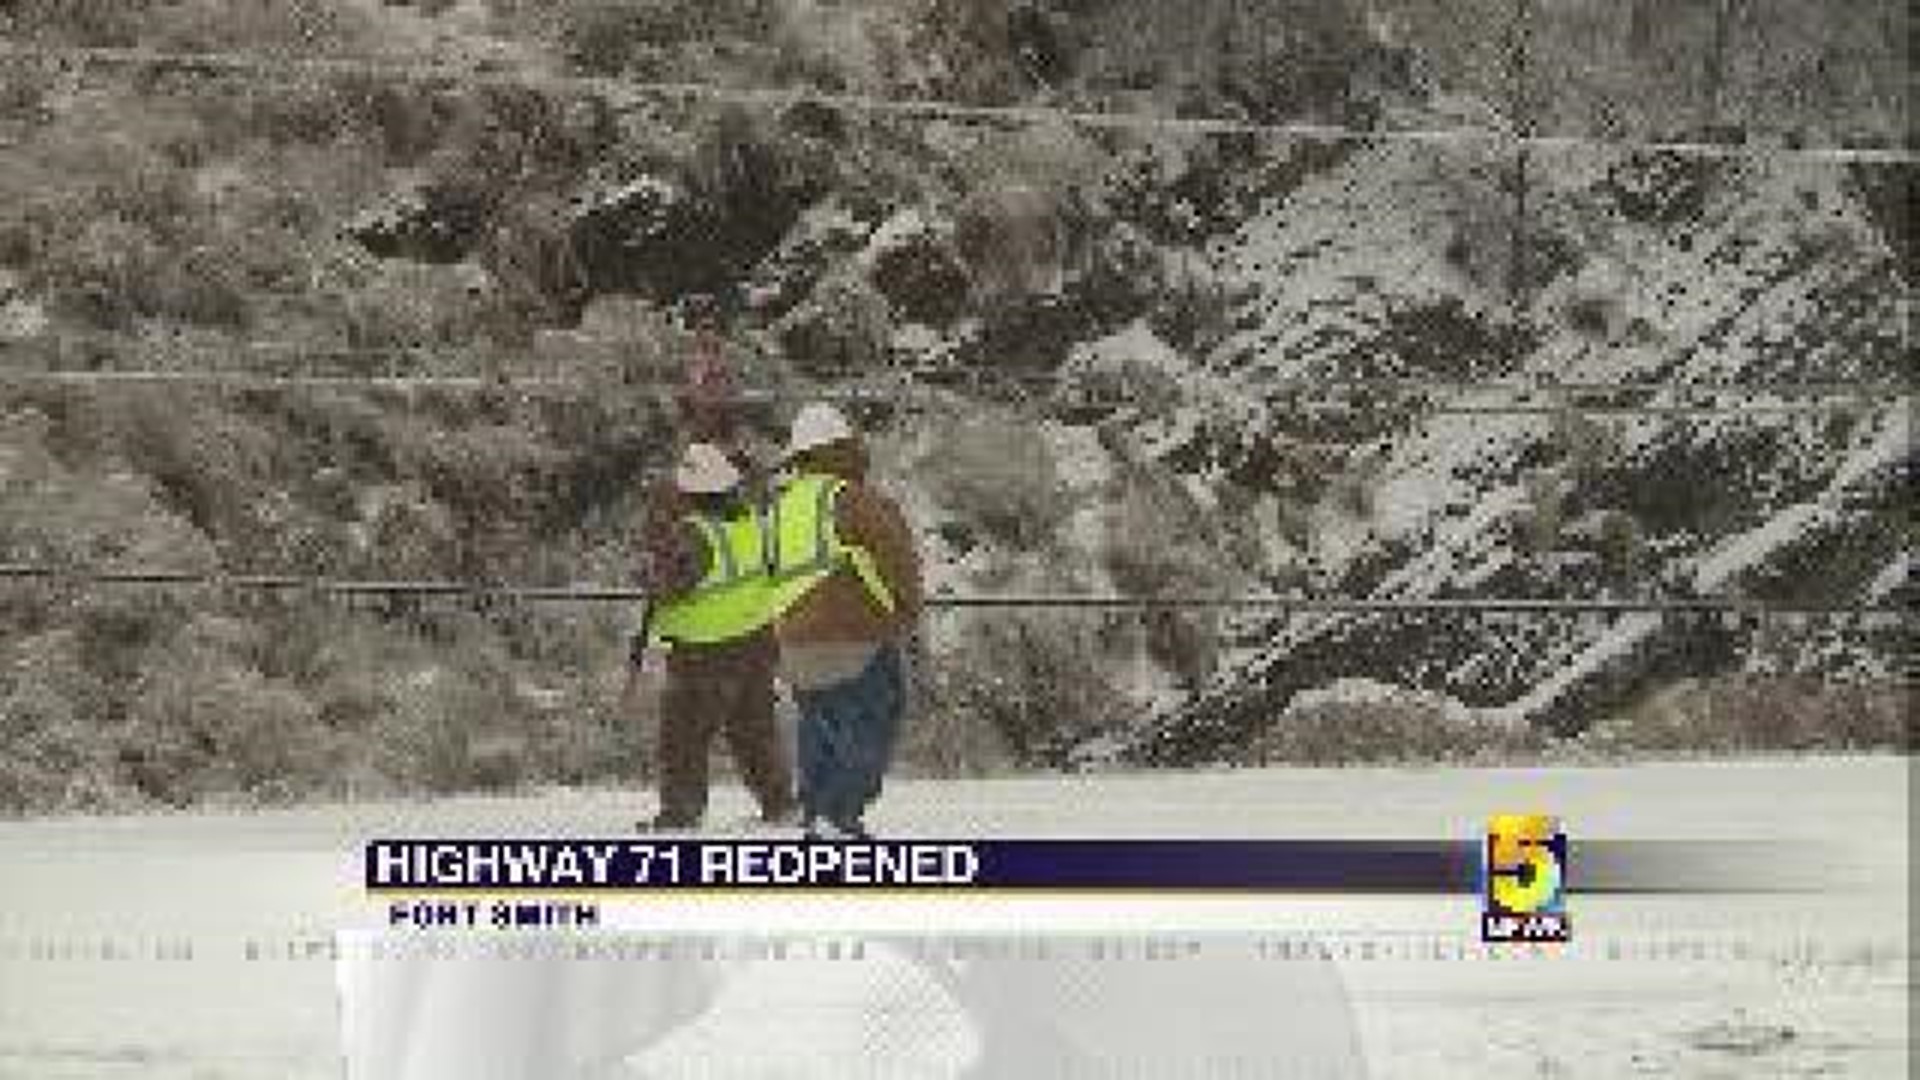 Roadways reopened in Fort Smith